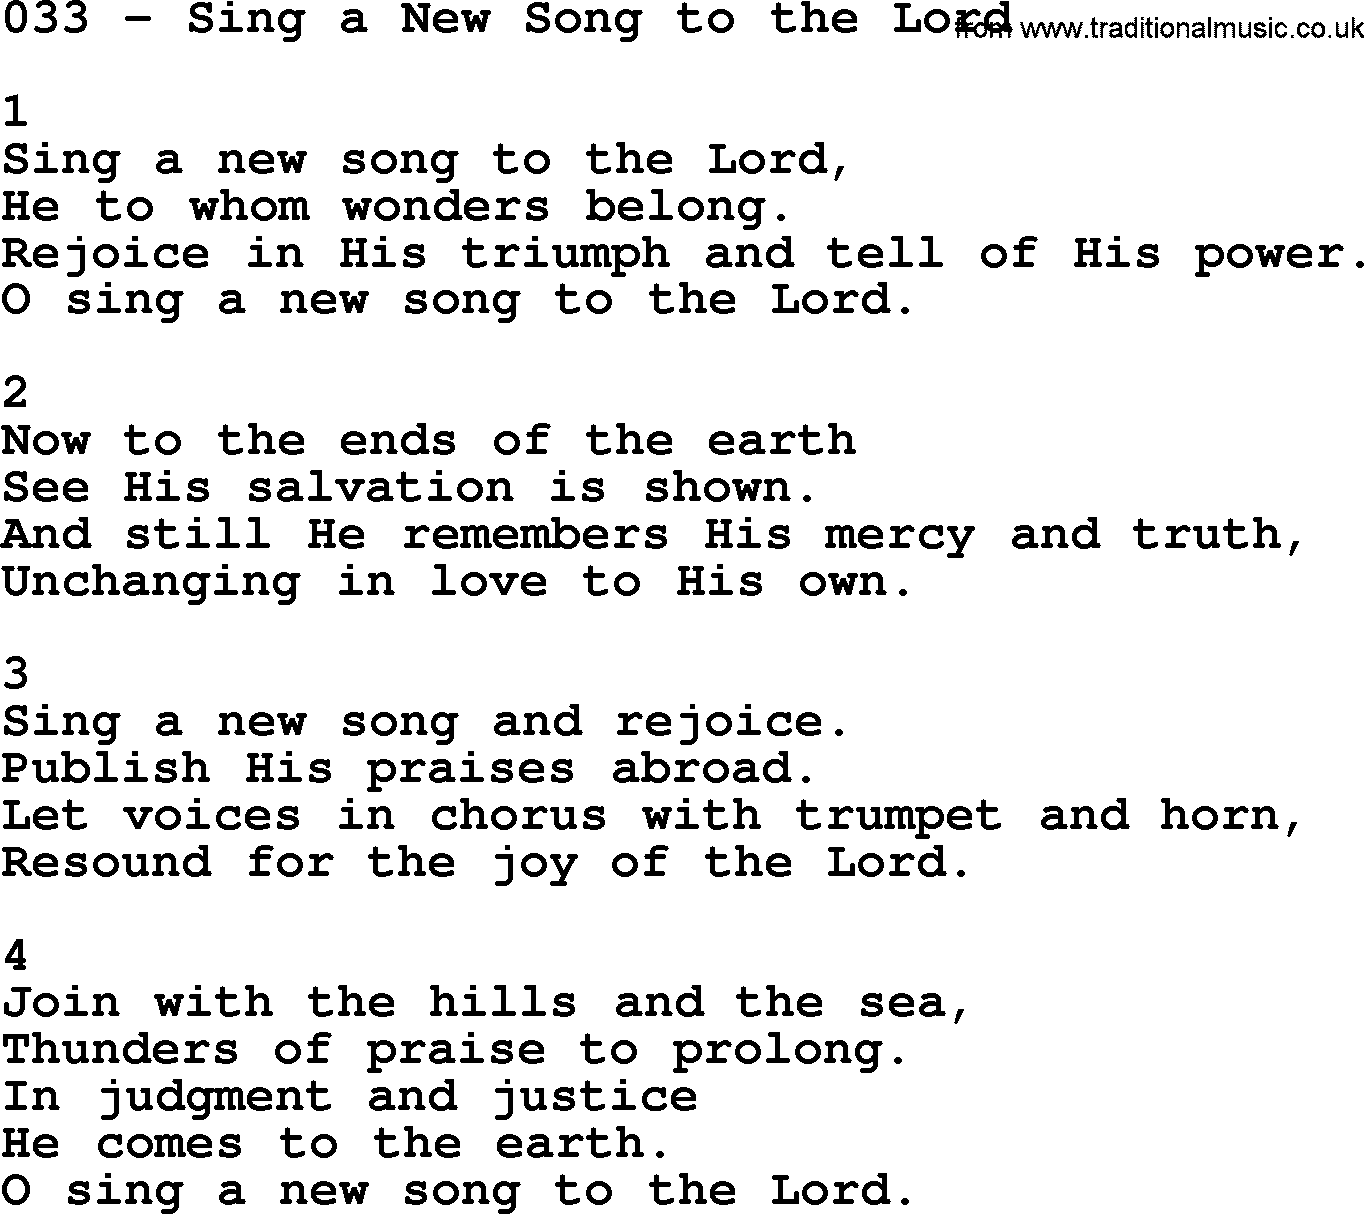 Complete Adventis Hymnal, title: 033-Sing A New Song To The Lord, with lyrics, midi, mp3, powerpoints(PPT) and PDF,